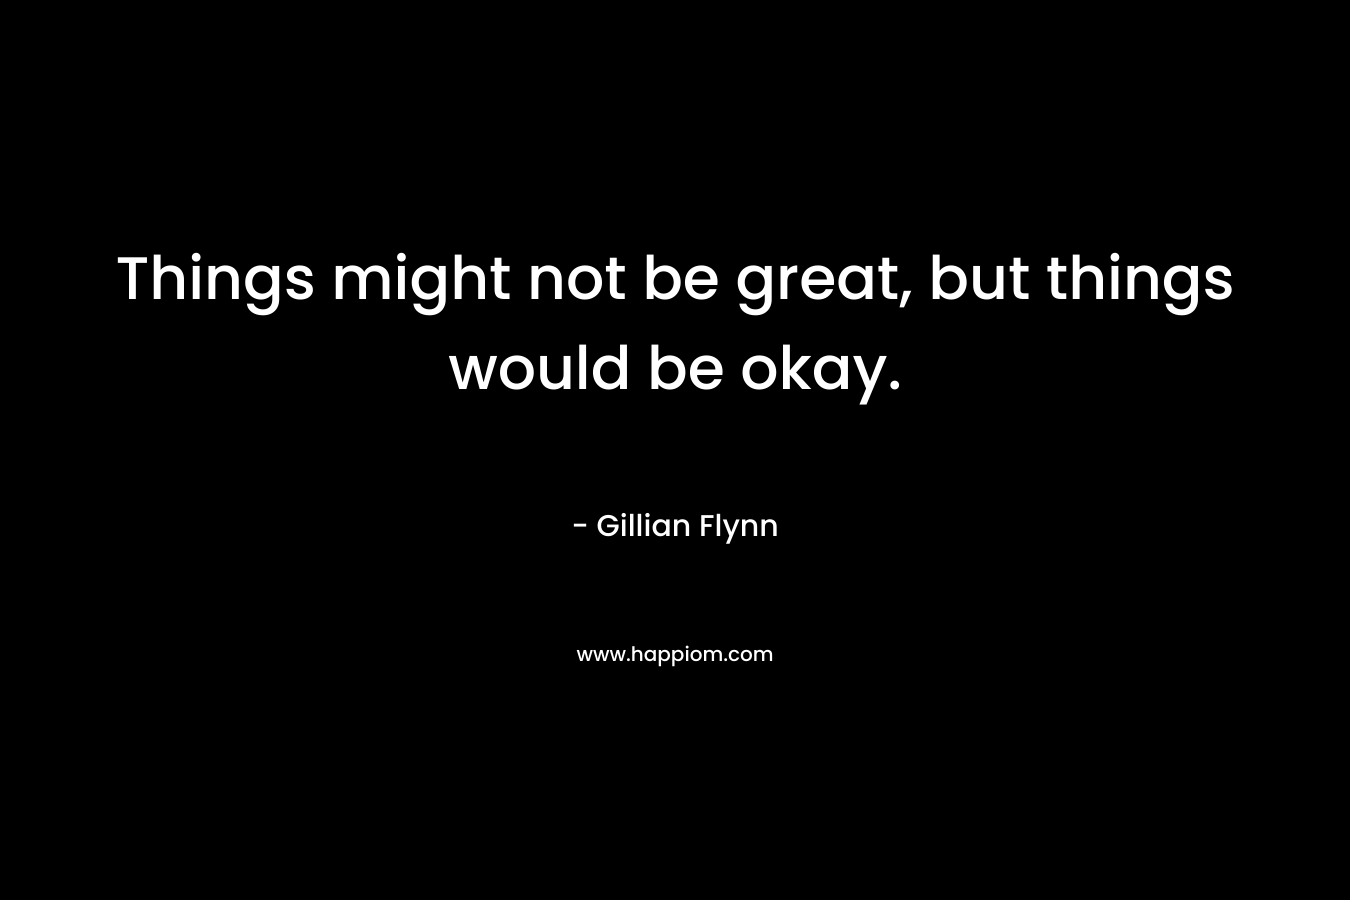 Things might not be great, but things would be okay. – Gillian Flynn